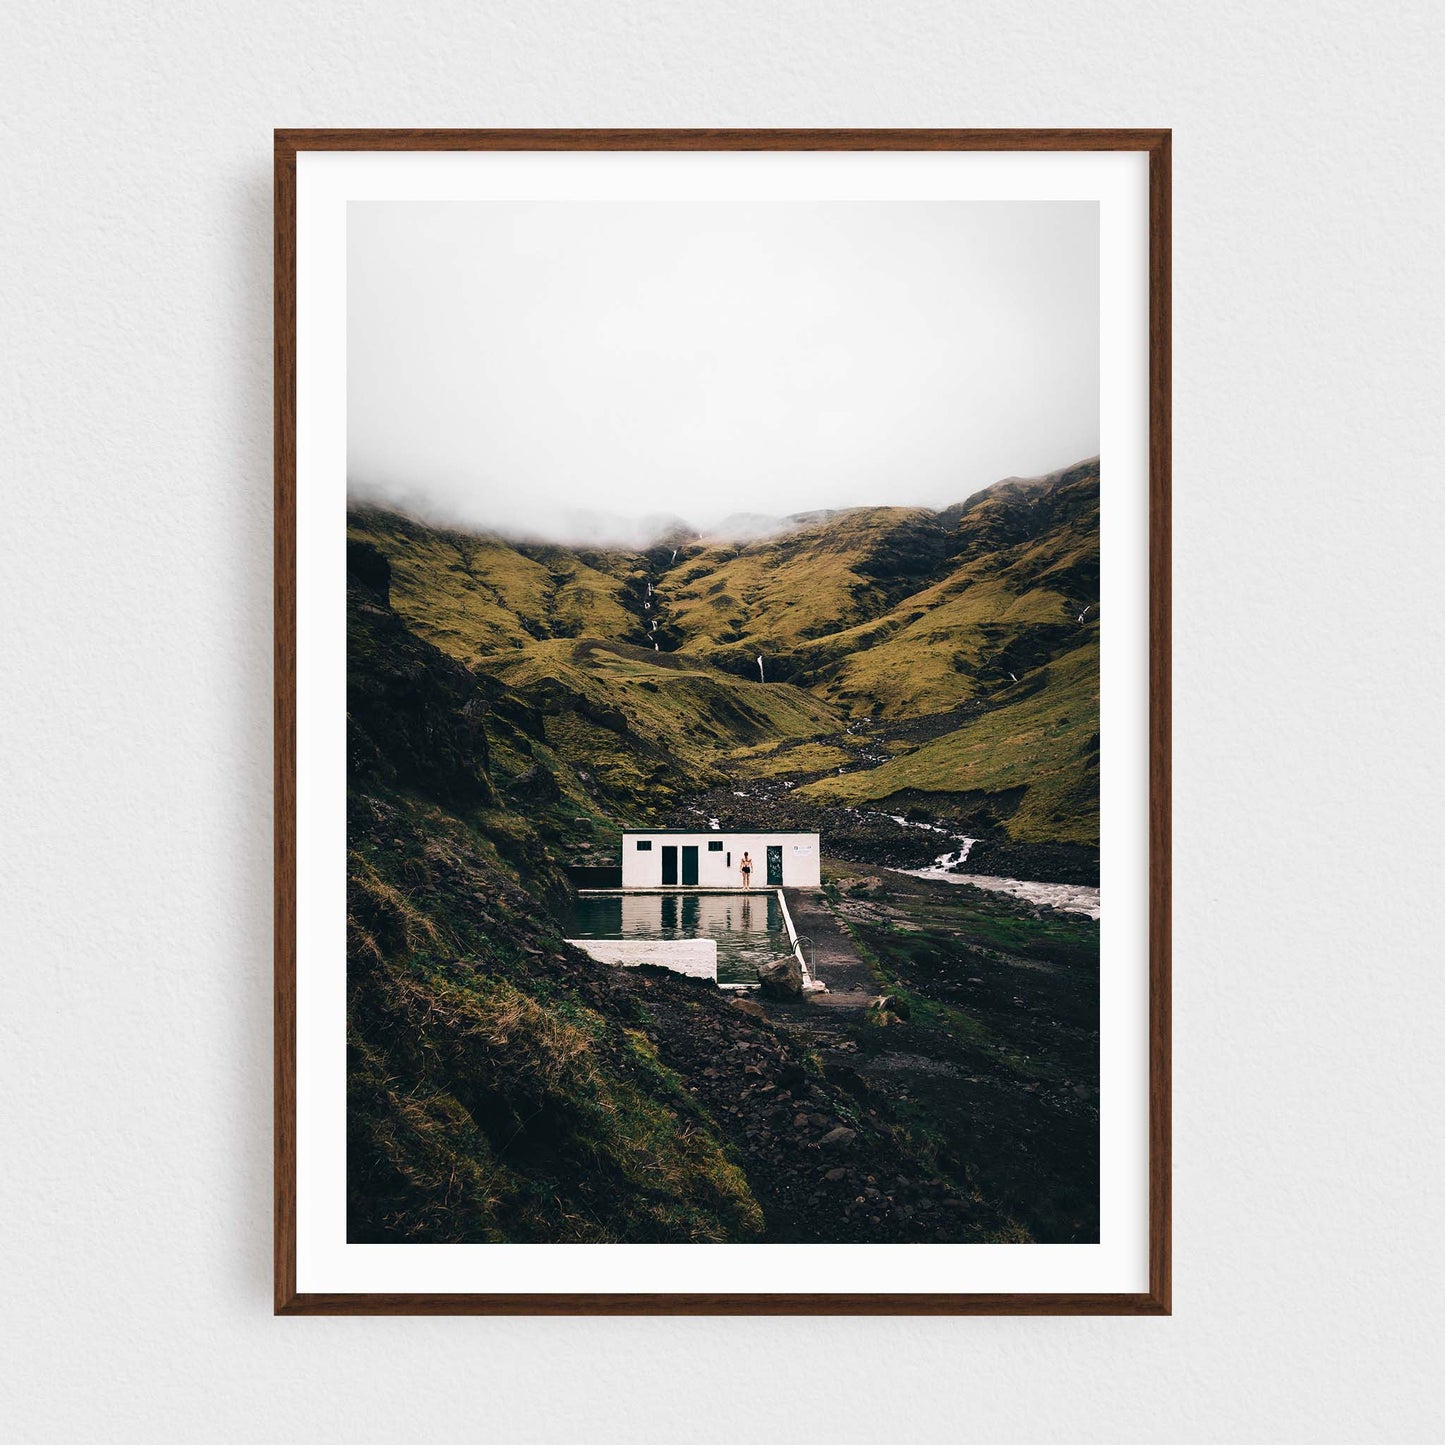 Iceland fine art photography print featuring Seljavallalaug pool, in a walnut frame